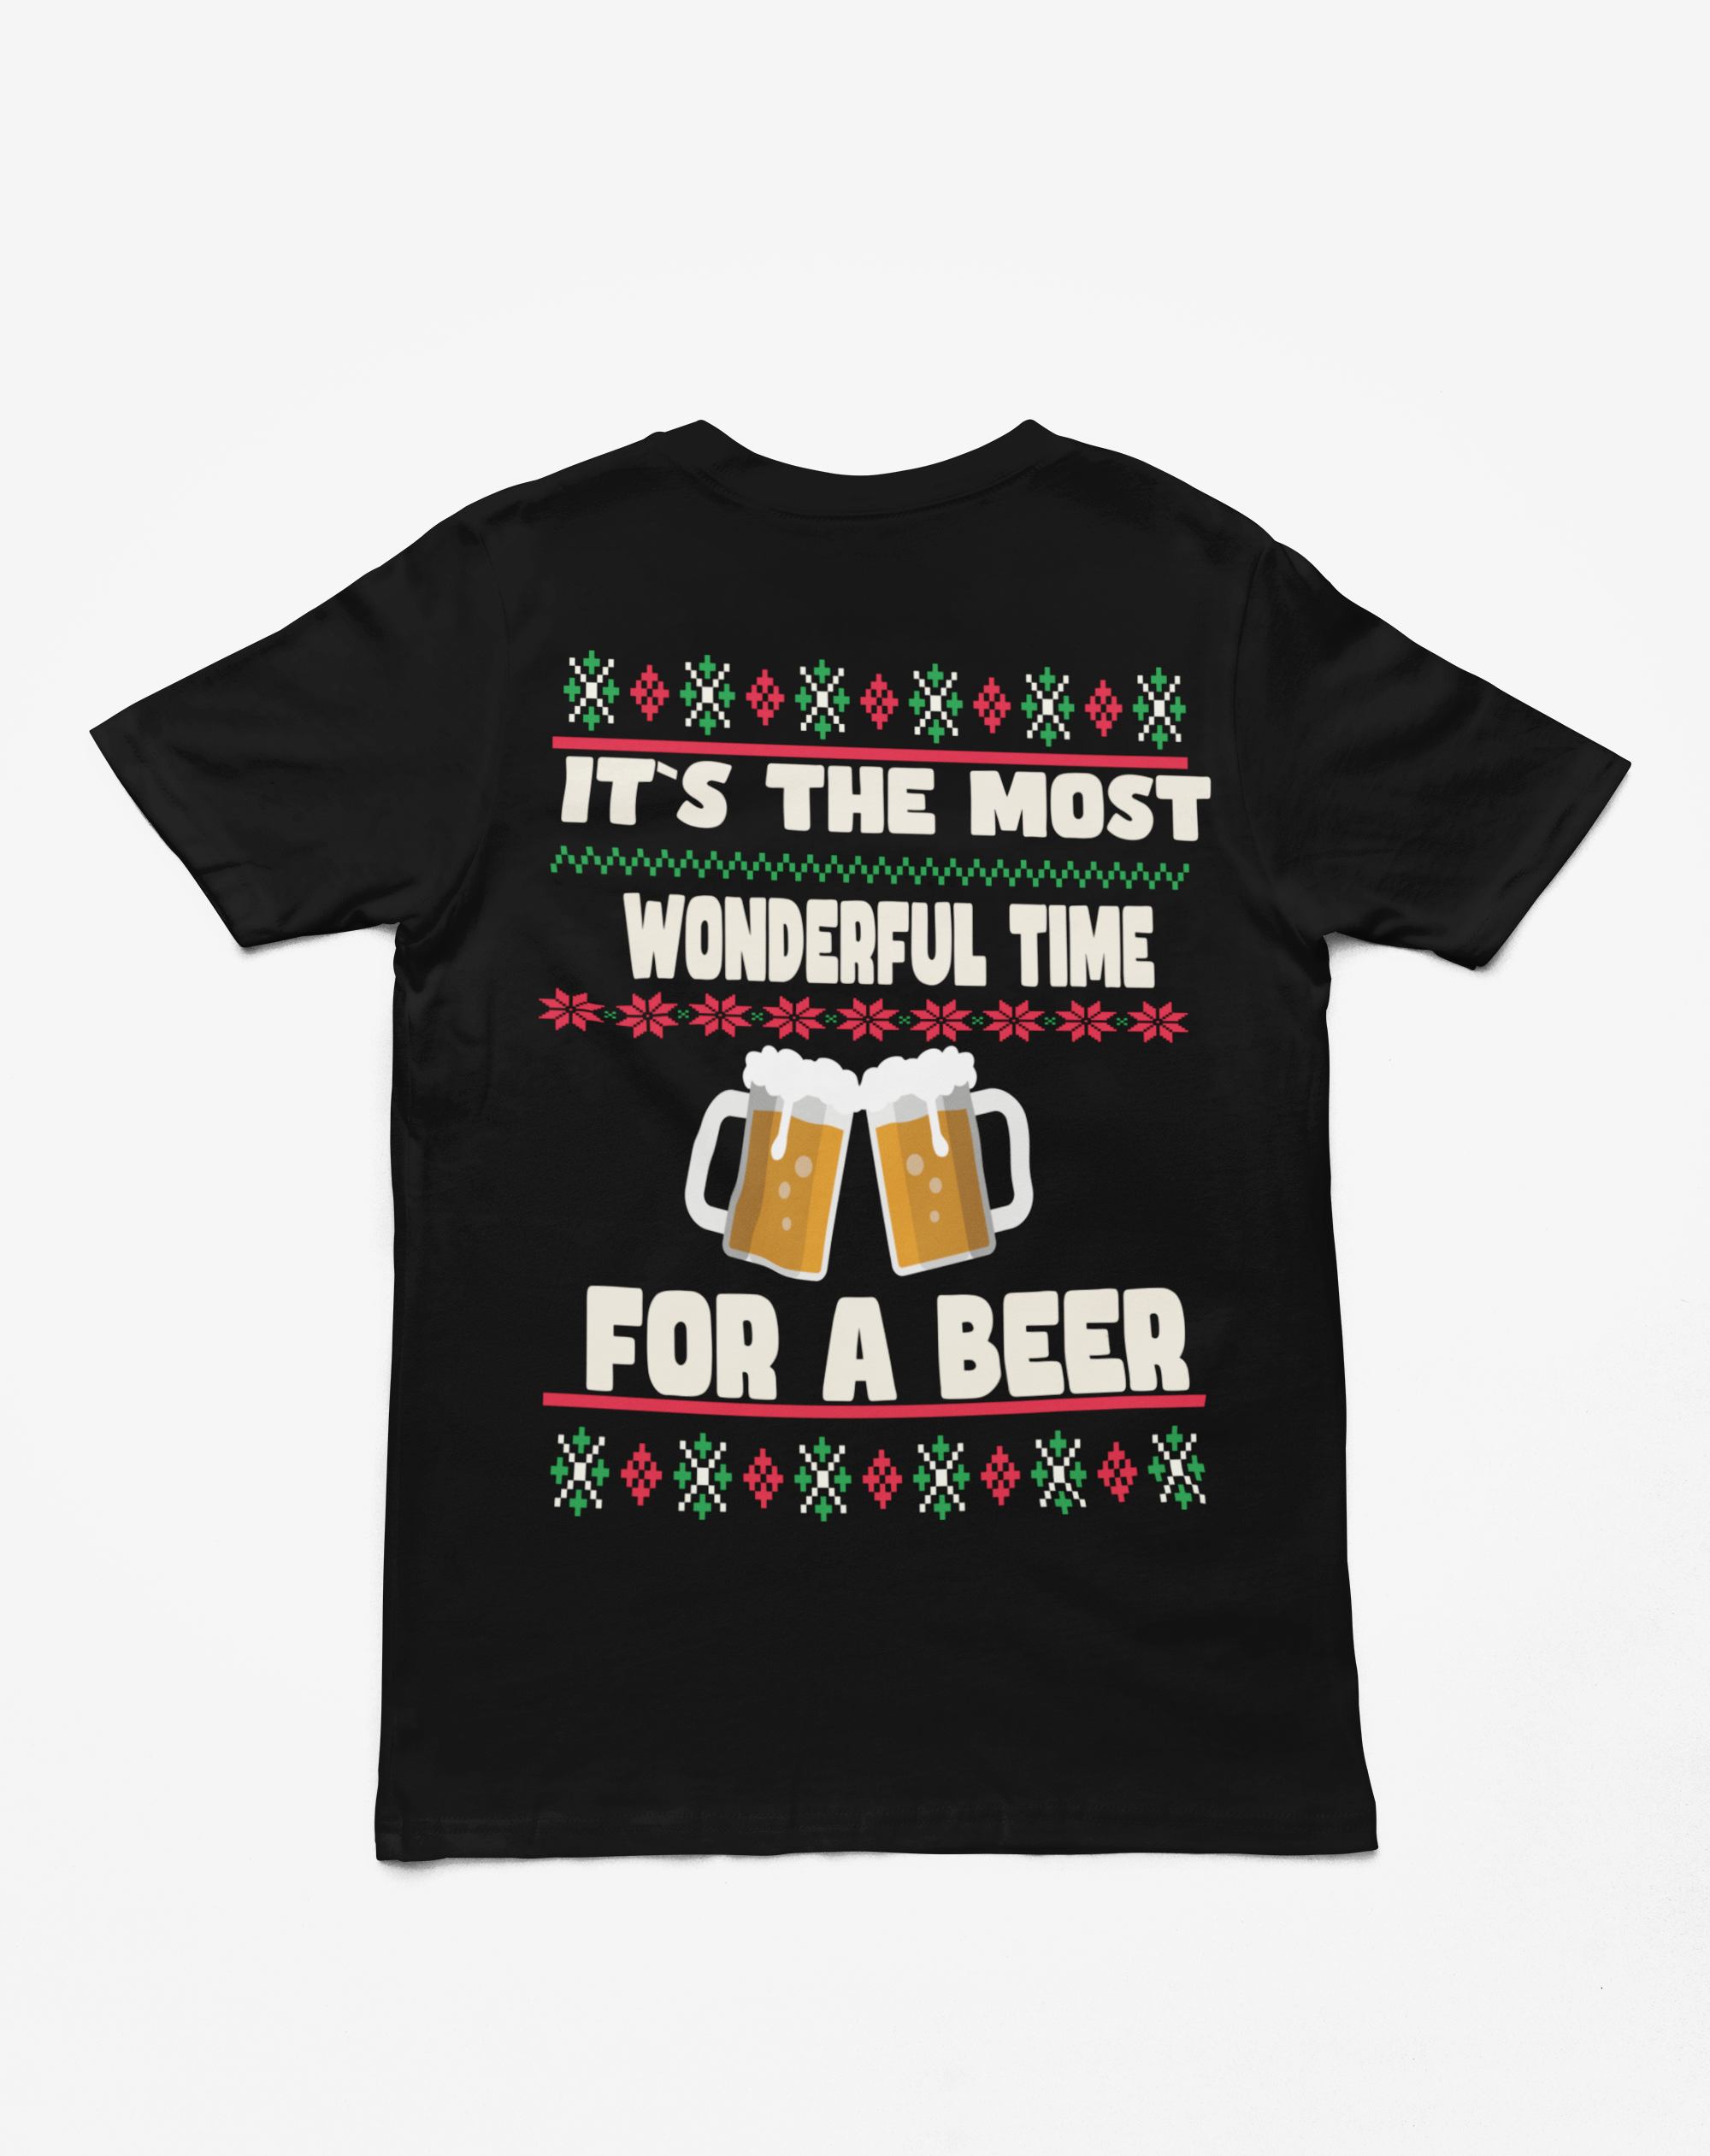 "Its the most wonderful time" T-Shirt